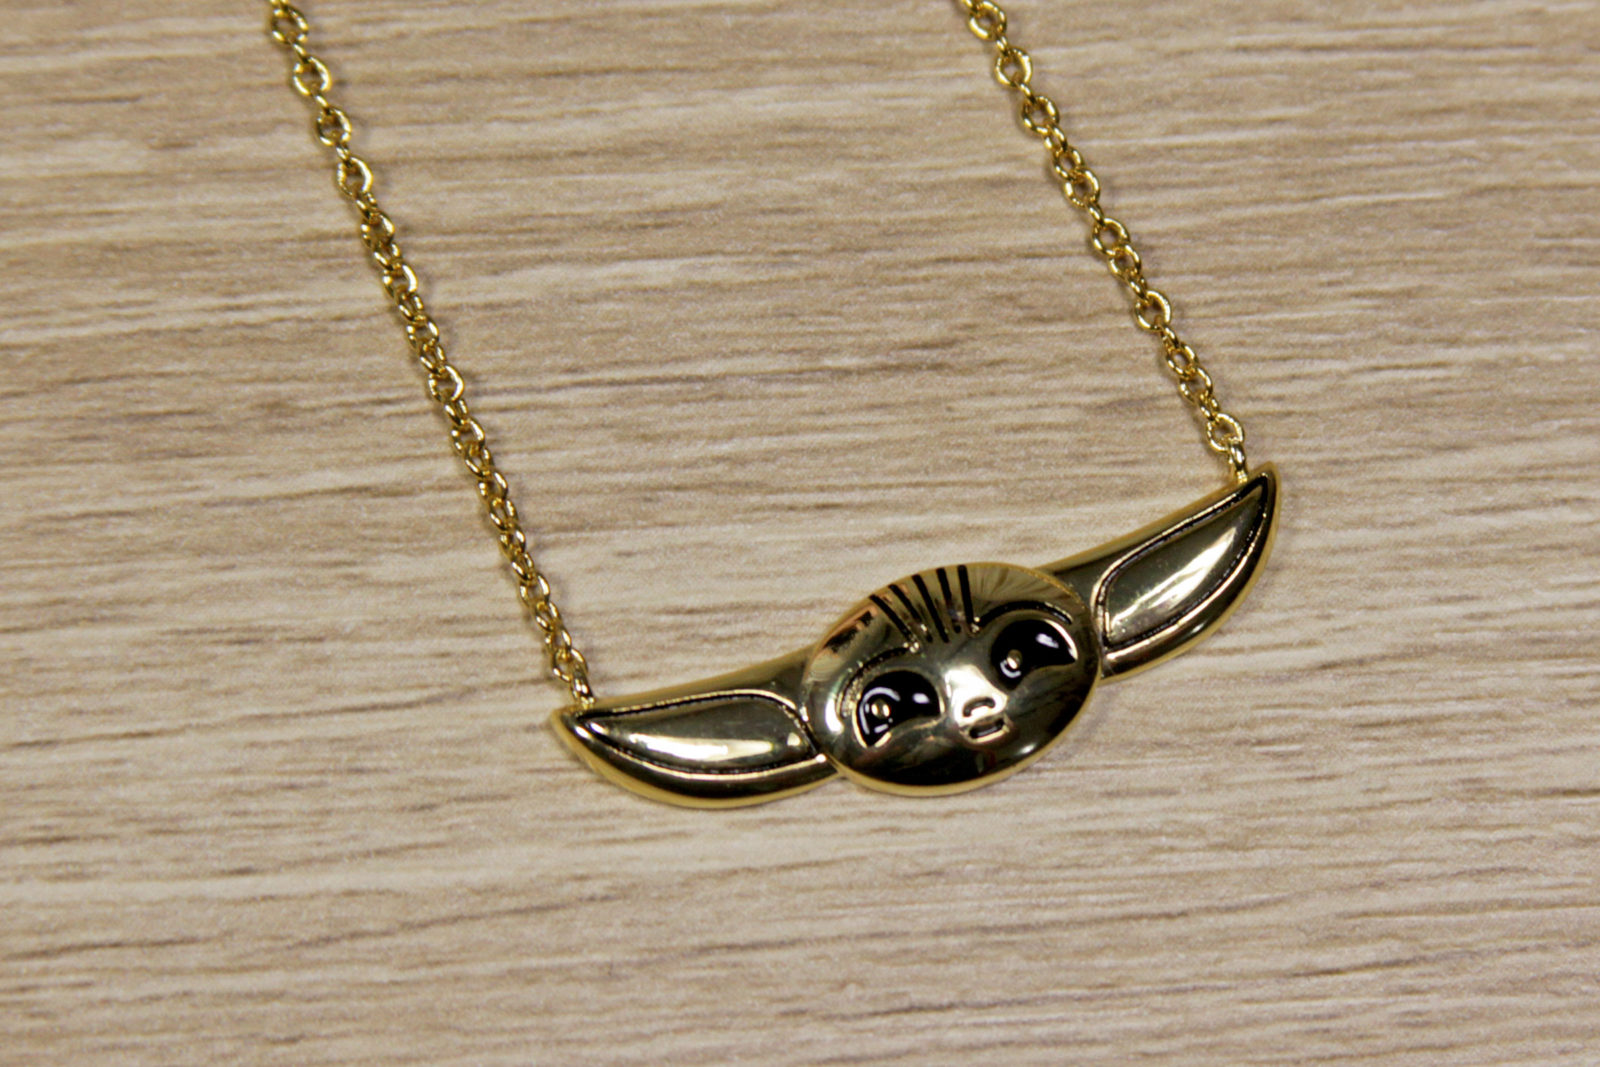 Mail Call – The Child Necklace by Jacmel